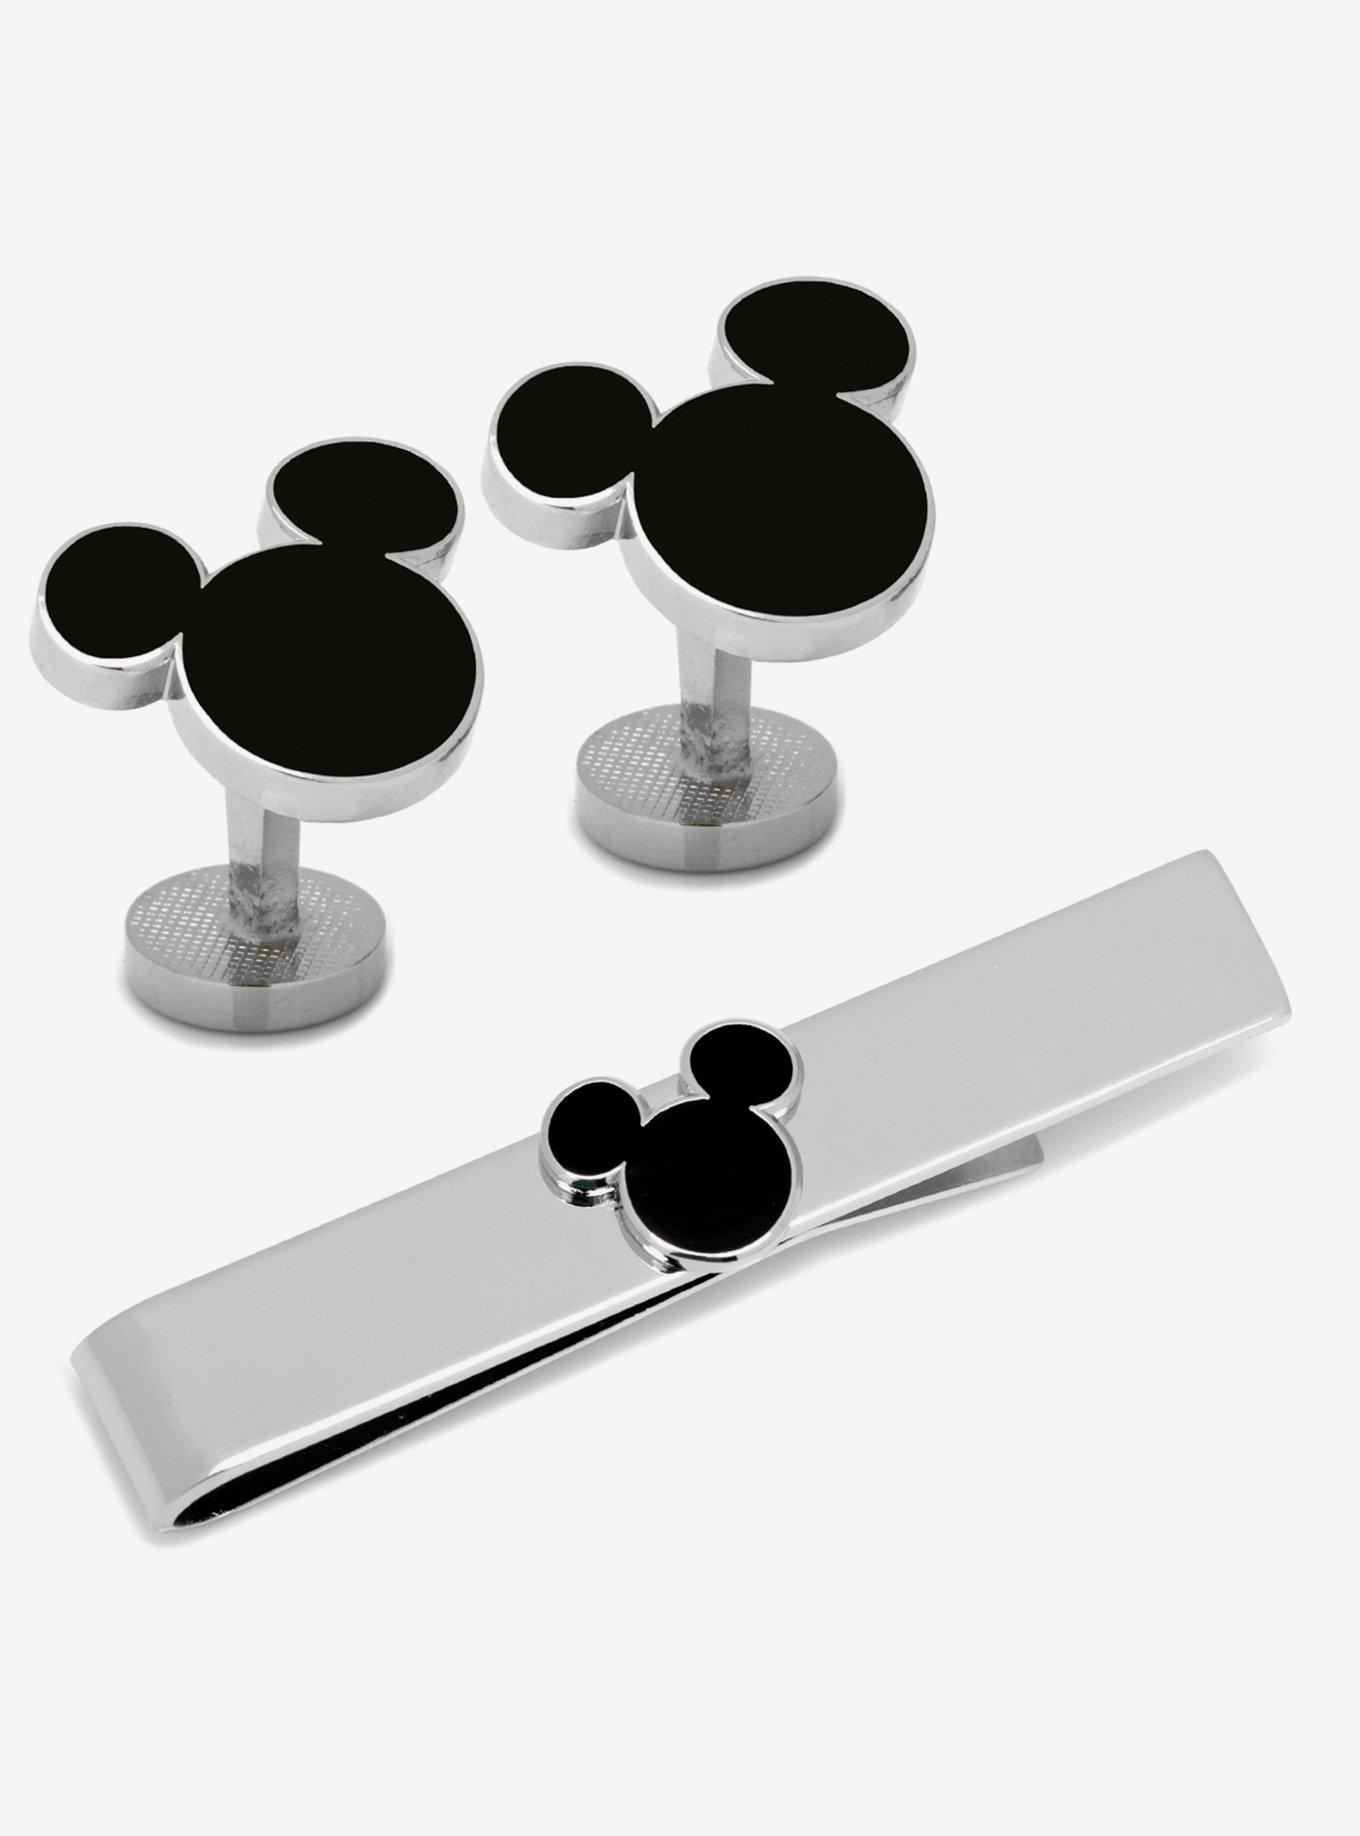 Disney Mickey Mouse Silhouette Cufflinks and Tie Bar Set